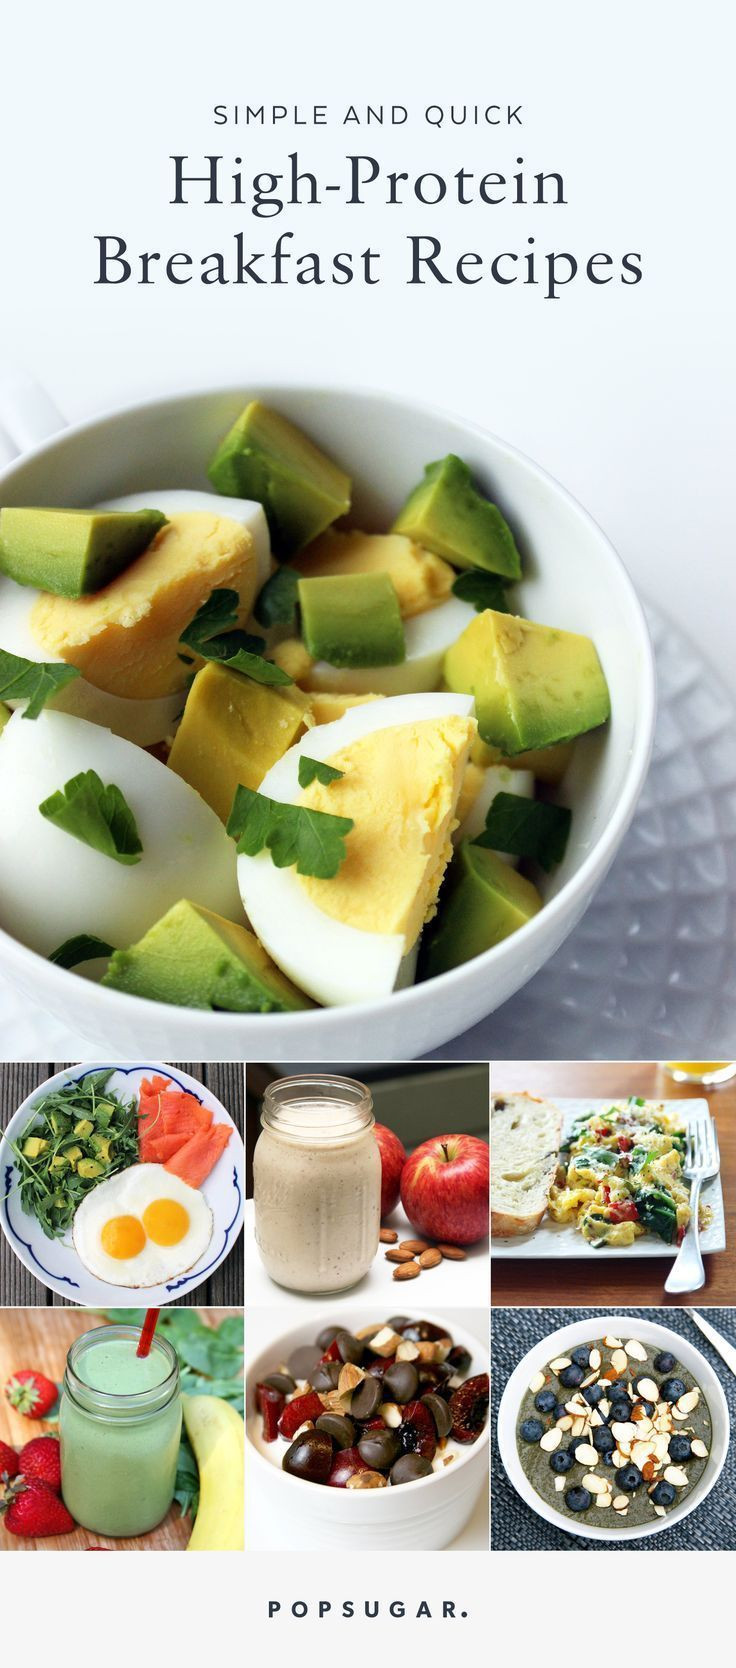 Easy Healthy Breakfast For Weight Loss
 25 best Gluten Free Recipes images on Pinterest